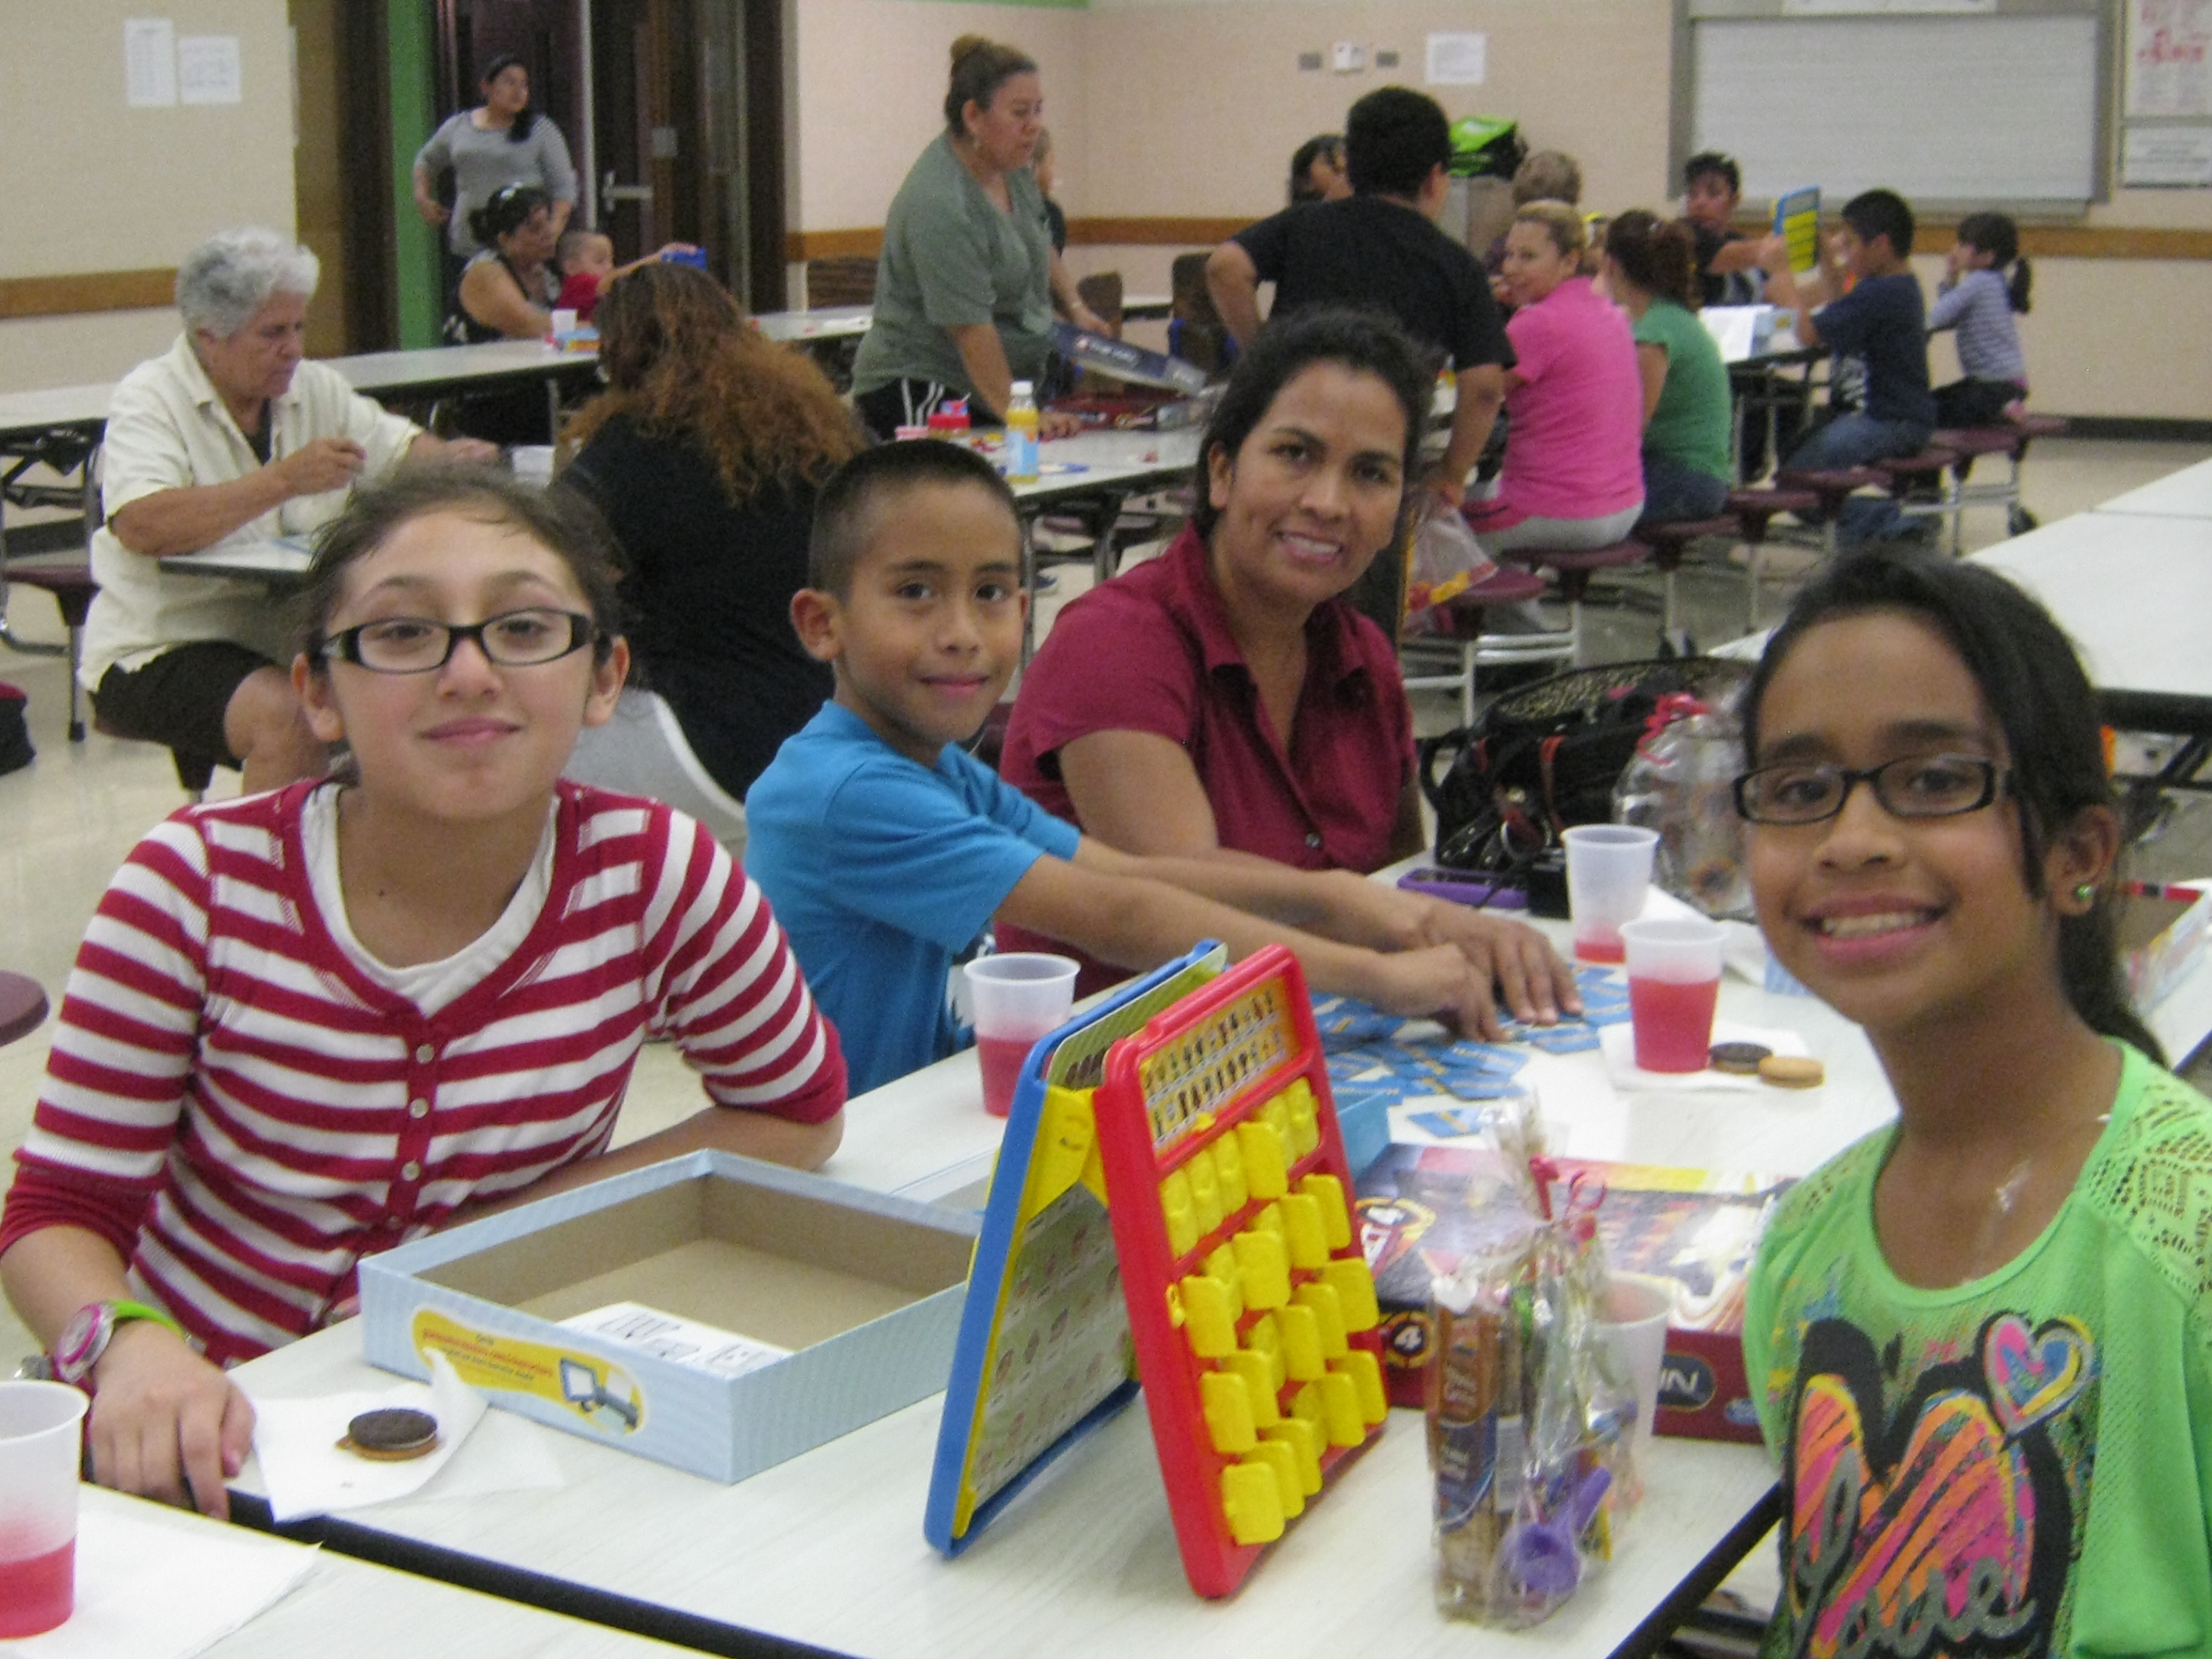 Bowie Elementary ACE program brings families together